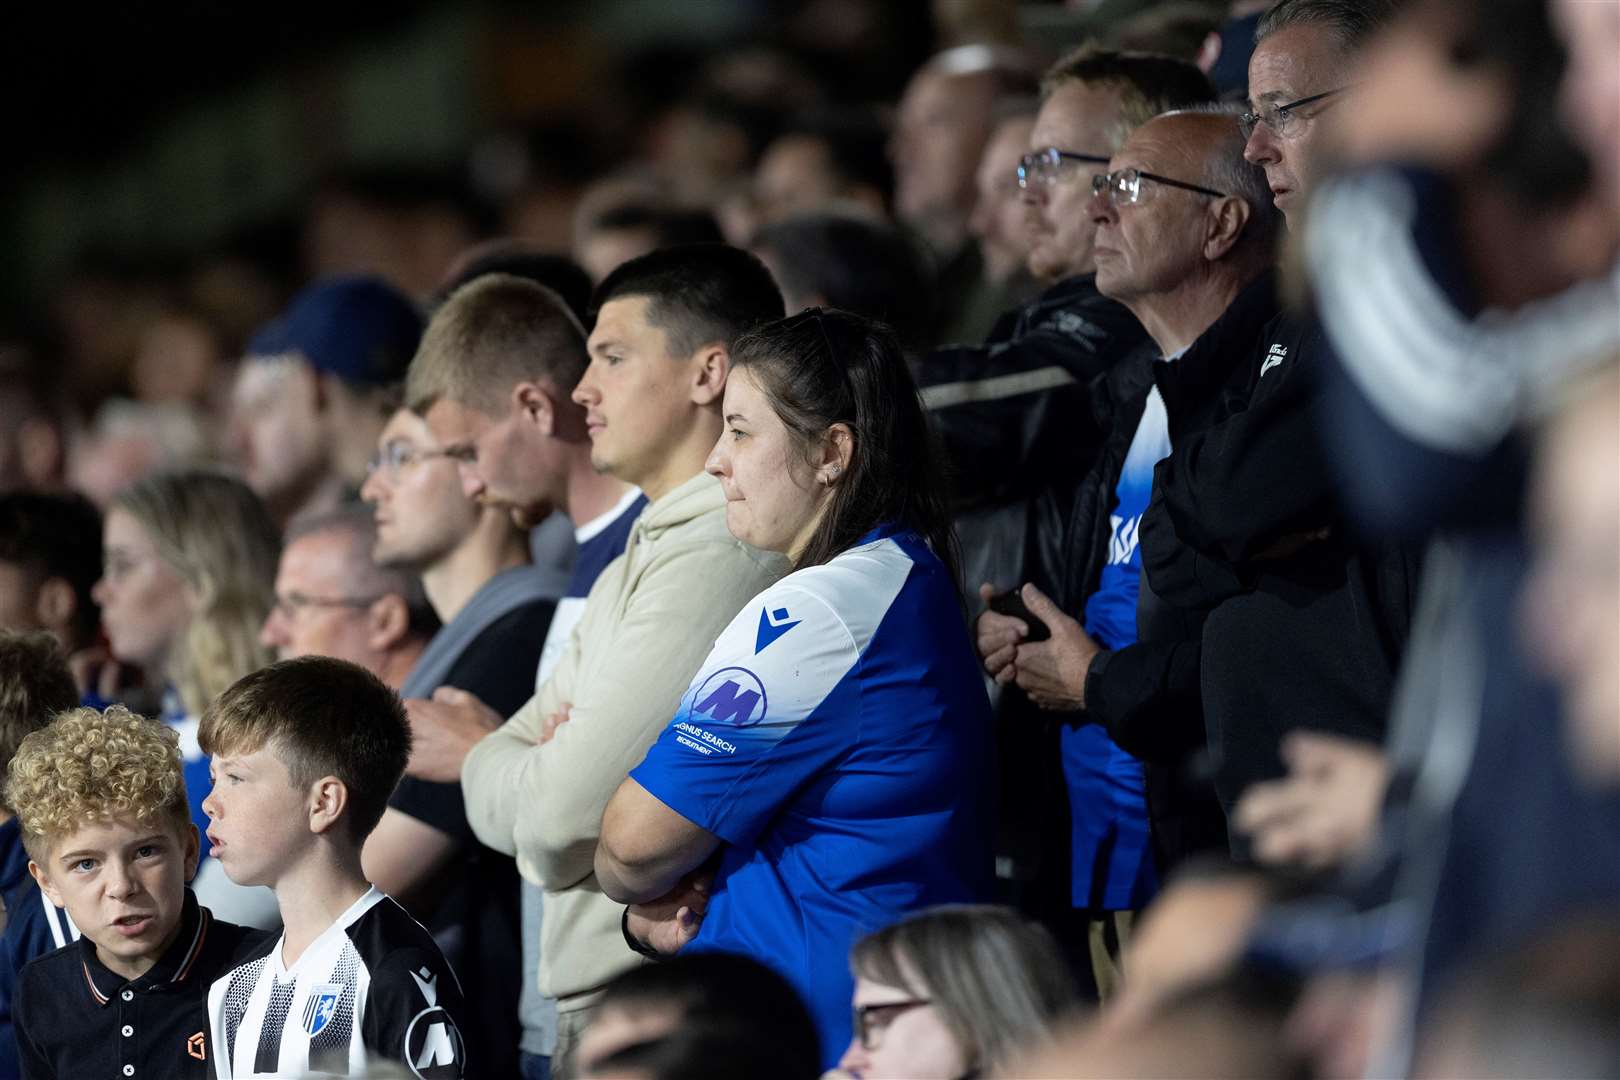 Gillingham fans who usually rely on the train can get to Saturday’s game on the bus